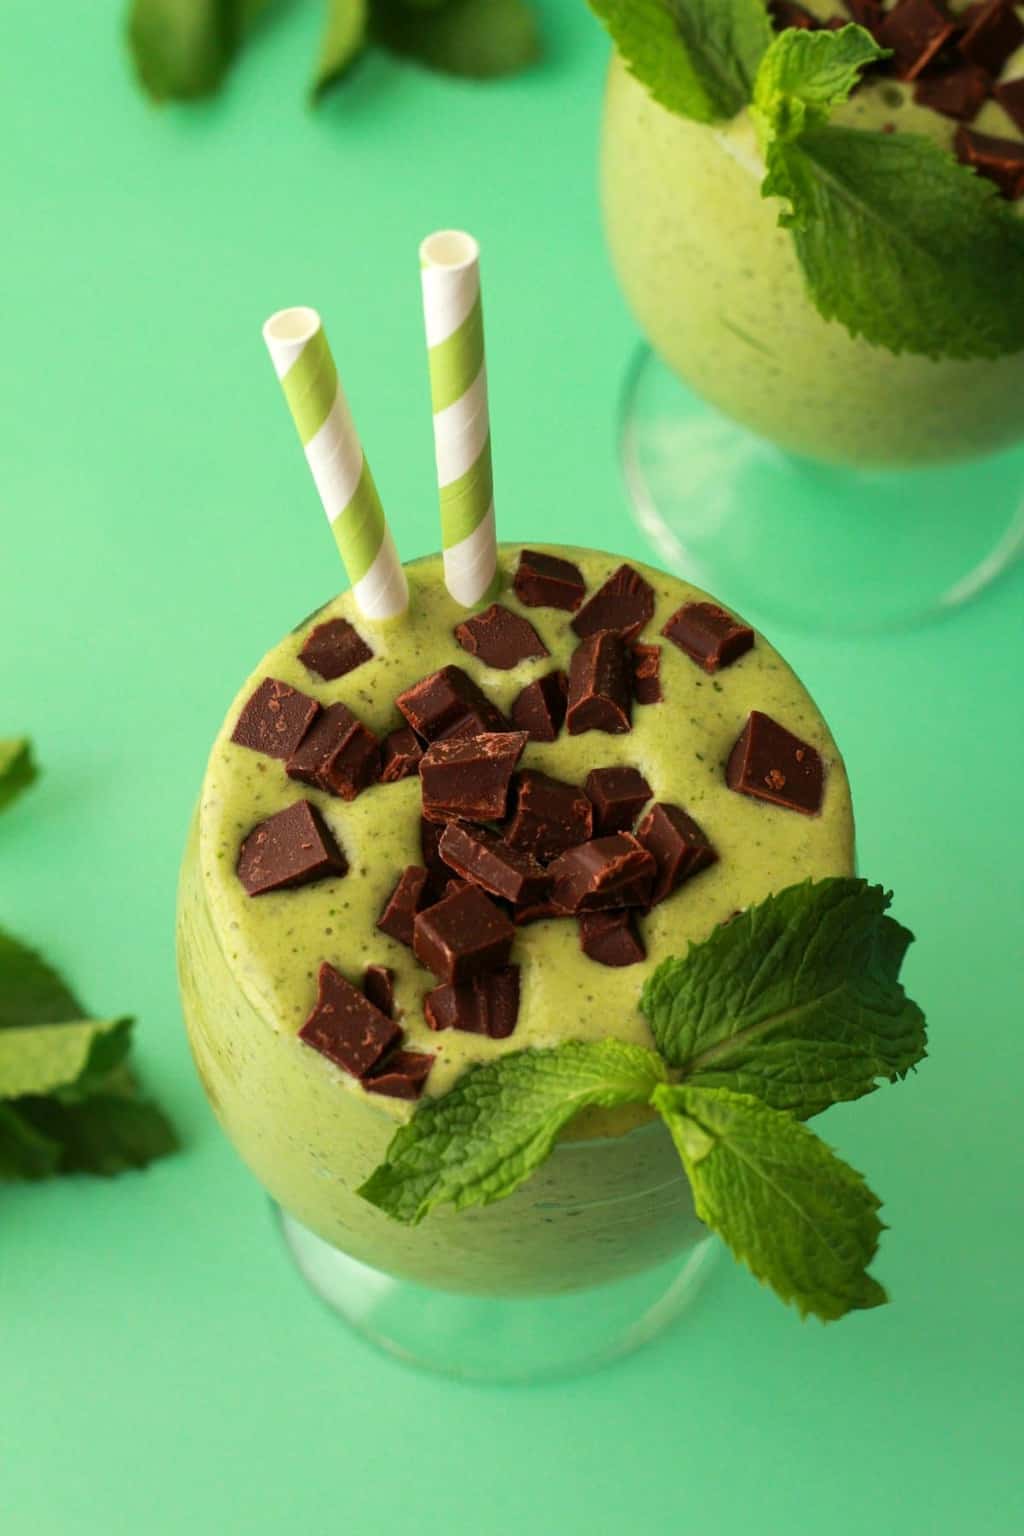 Mint smoothie with fresh mint in a glass with a green and white striped straw. 